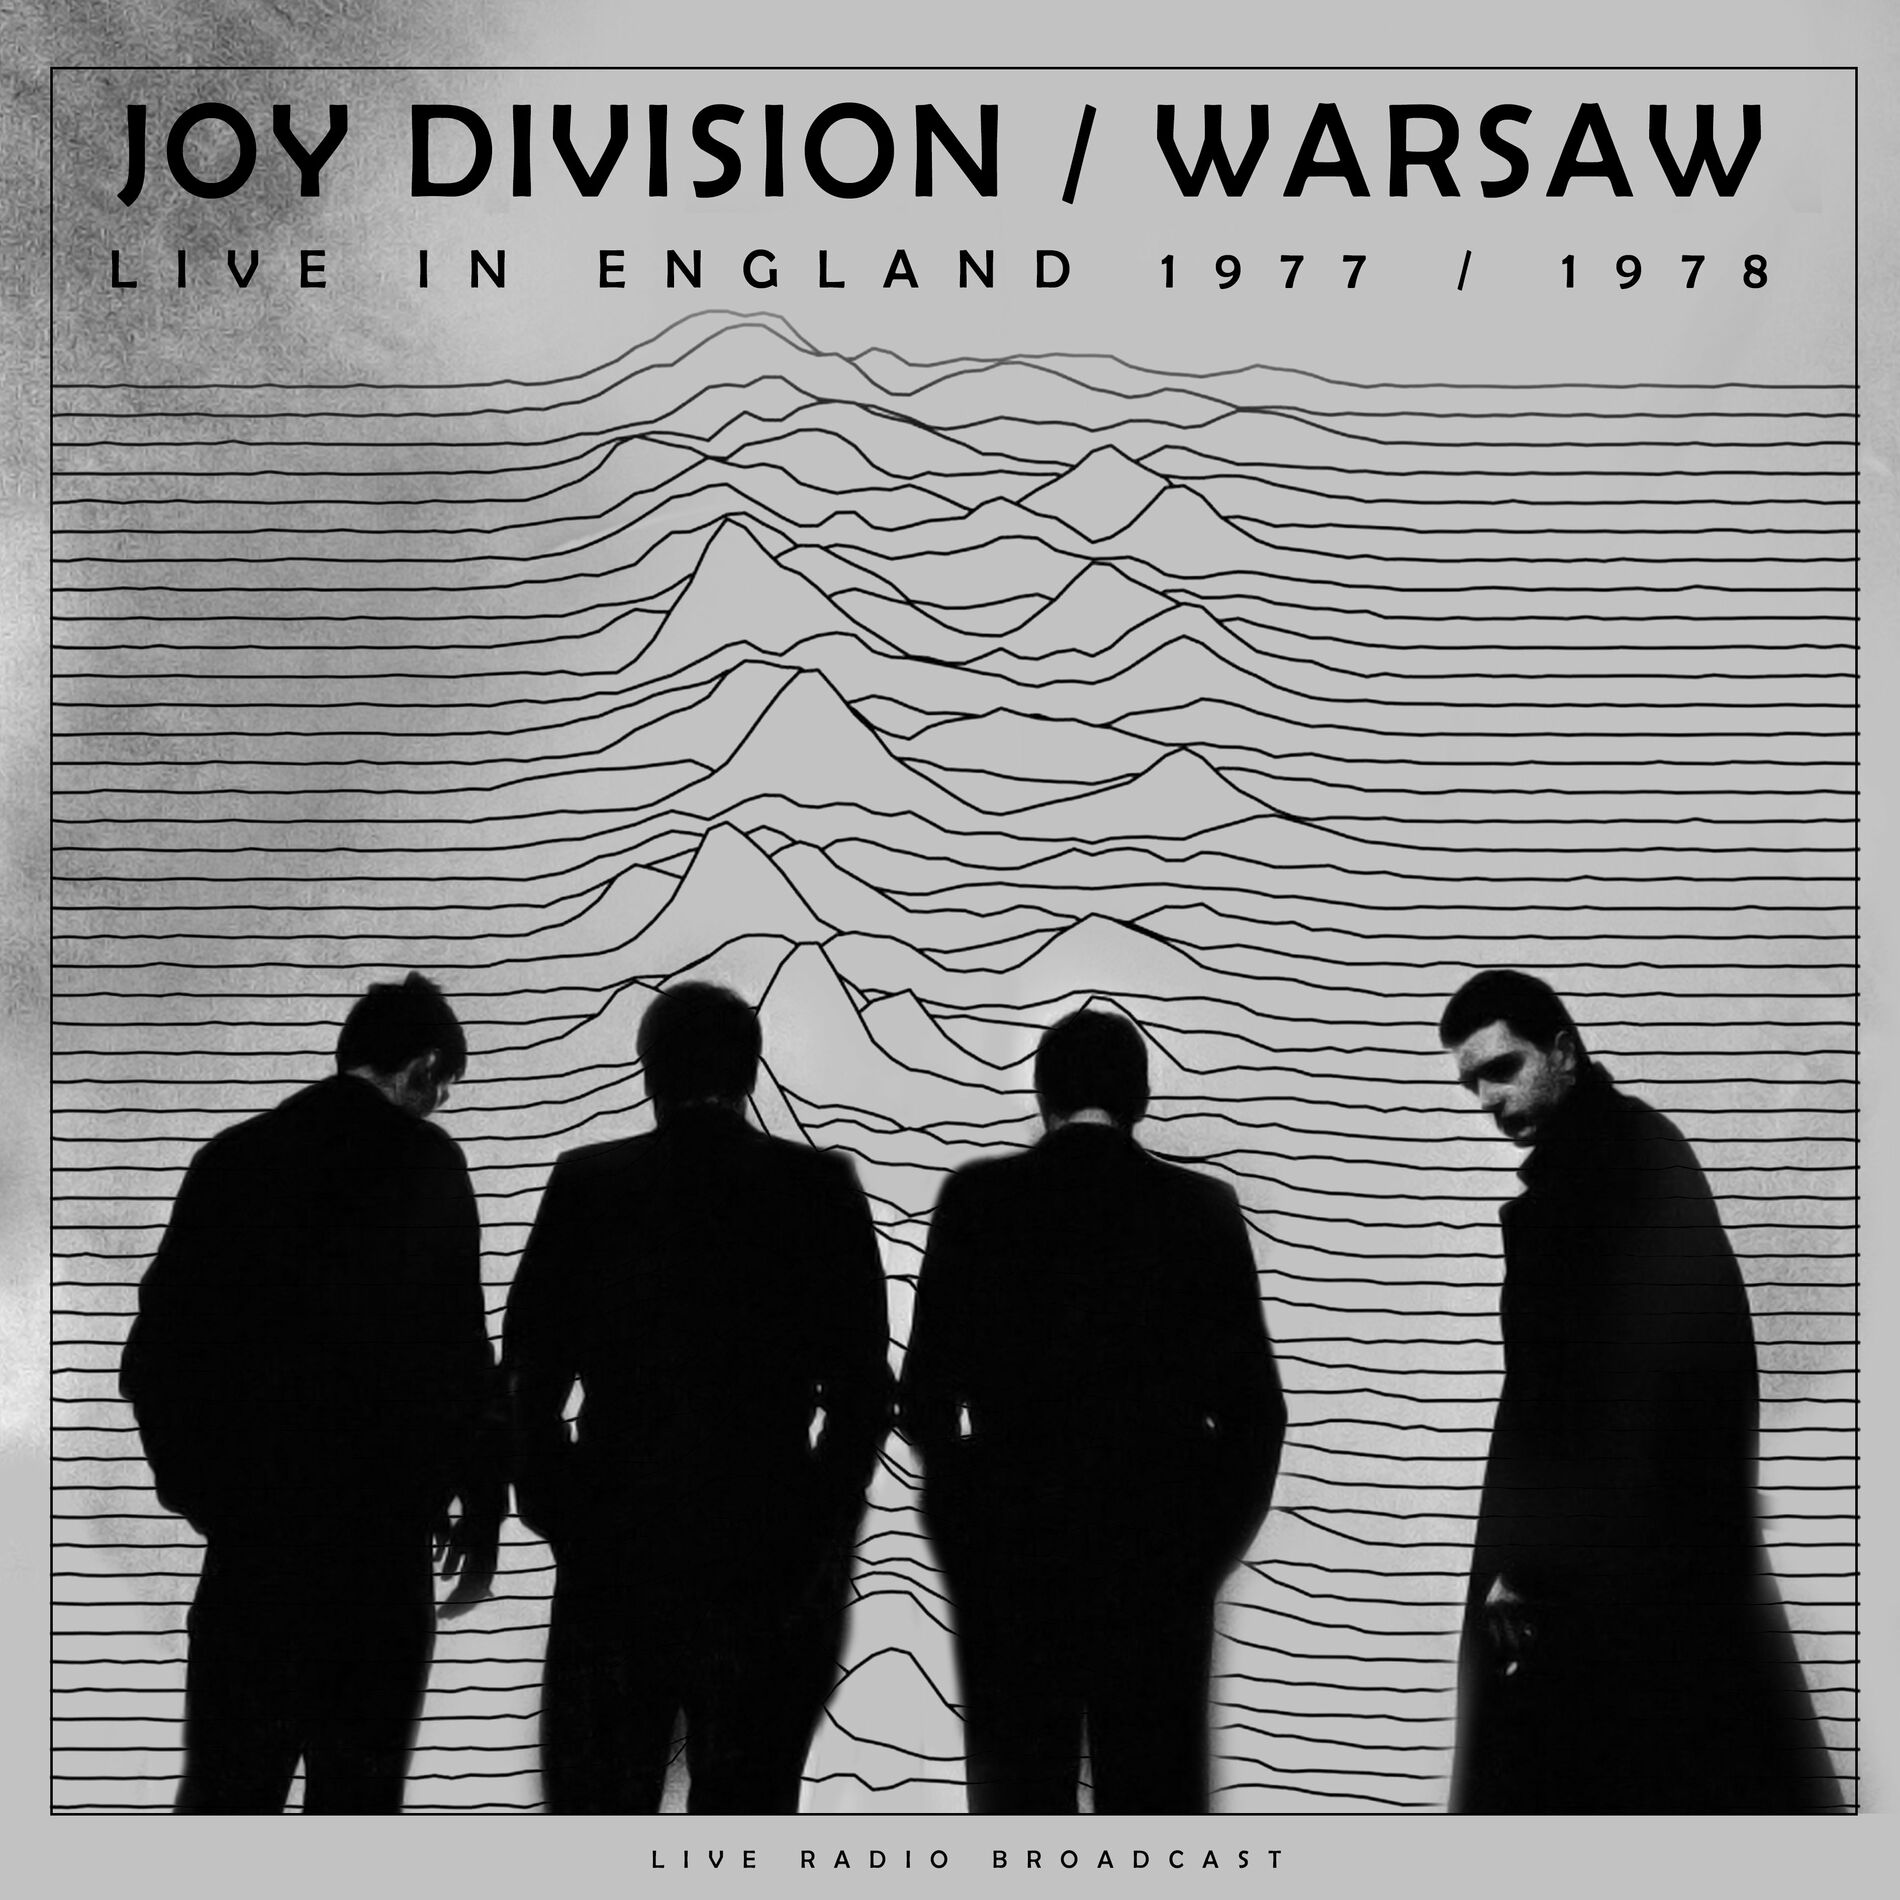 Joy Division - Live in England 1977 / 1978 (live): lyrics and 